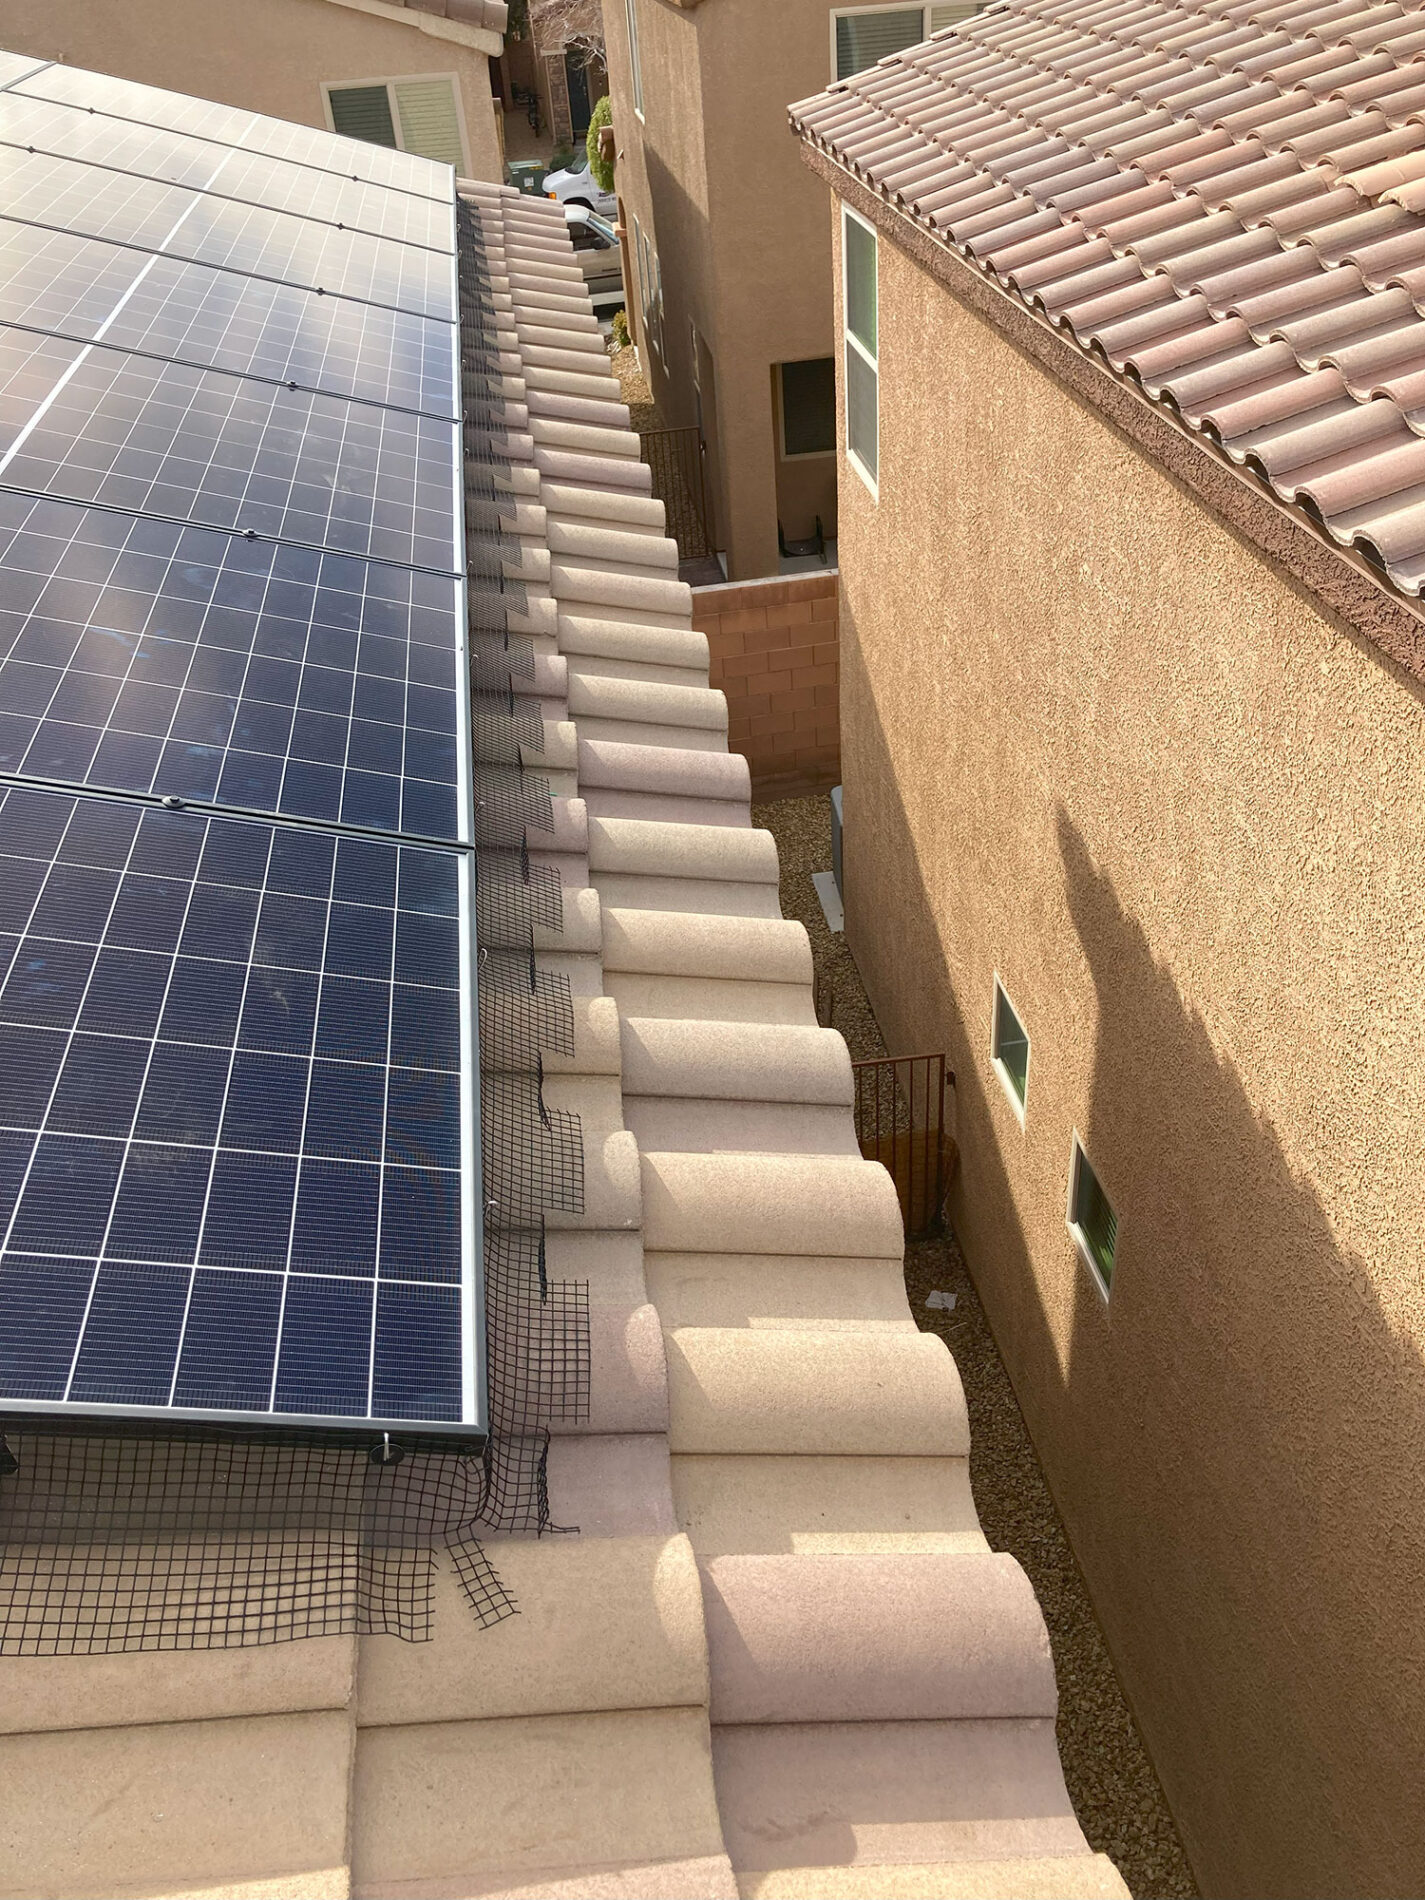 Sol-Up, solar services, Westgate, Southern Nevada, sustainable energy, solar installations, renewable energy, sunlight, climate, savings, expert team